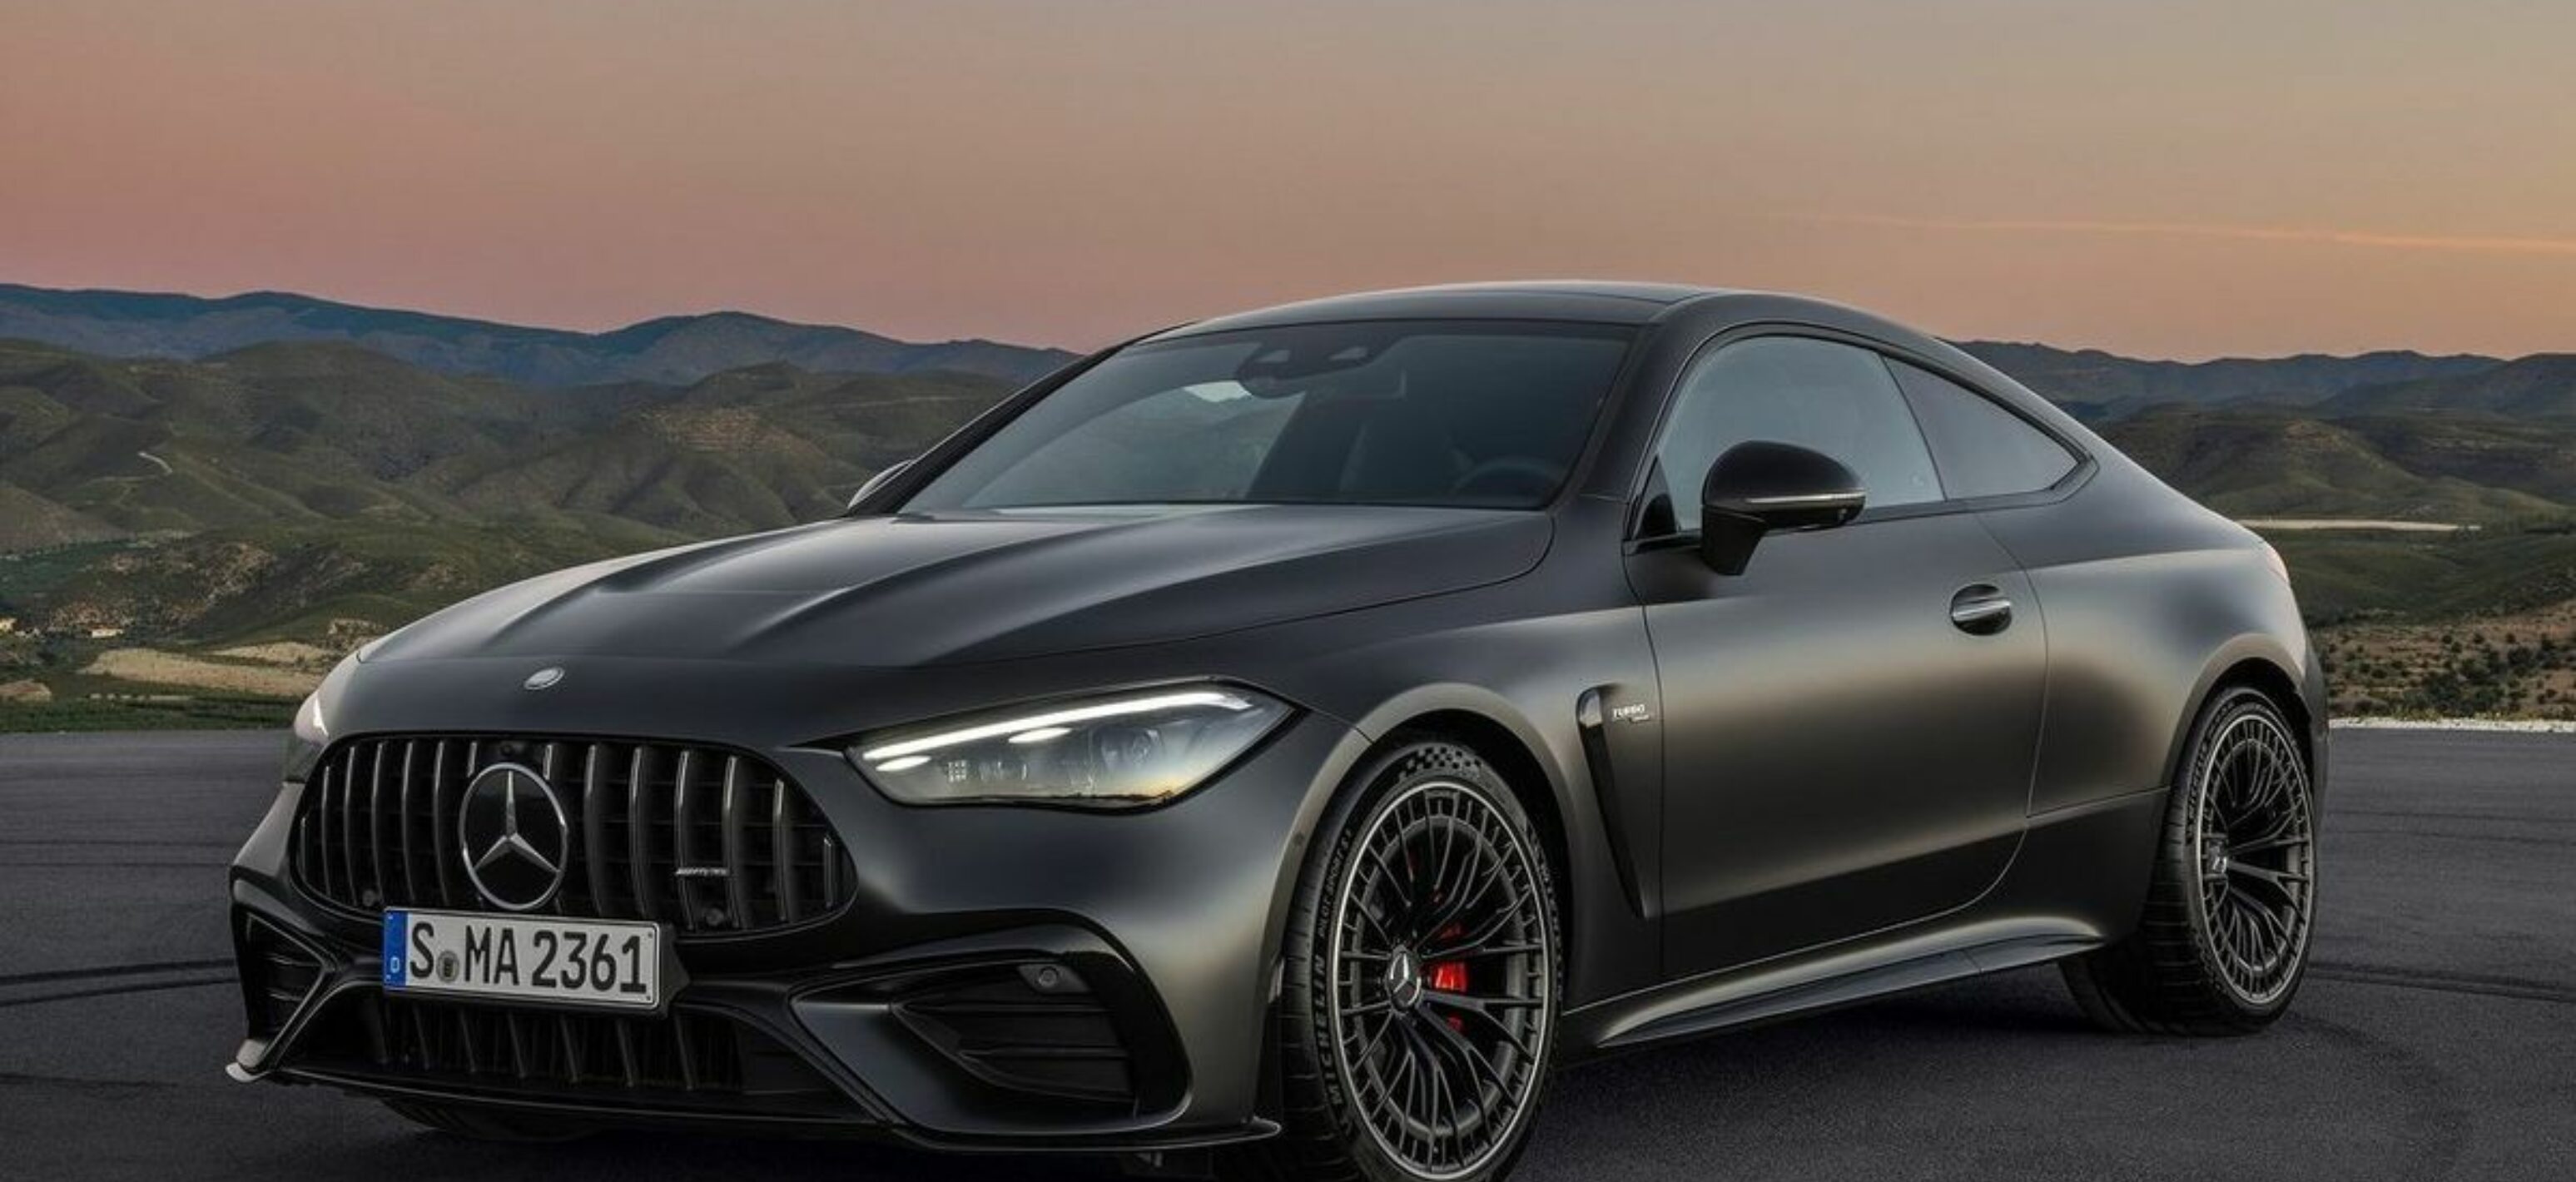 https://autofilter.sk/assets/images/cle-kupe/gallery/mercedes-benz-cle-53-amg-coupe-2024_16-galeria.jpg - obrazok